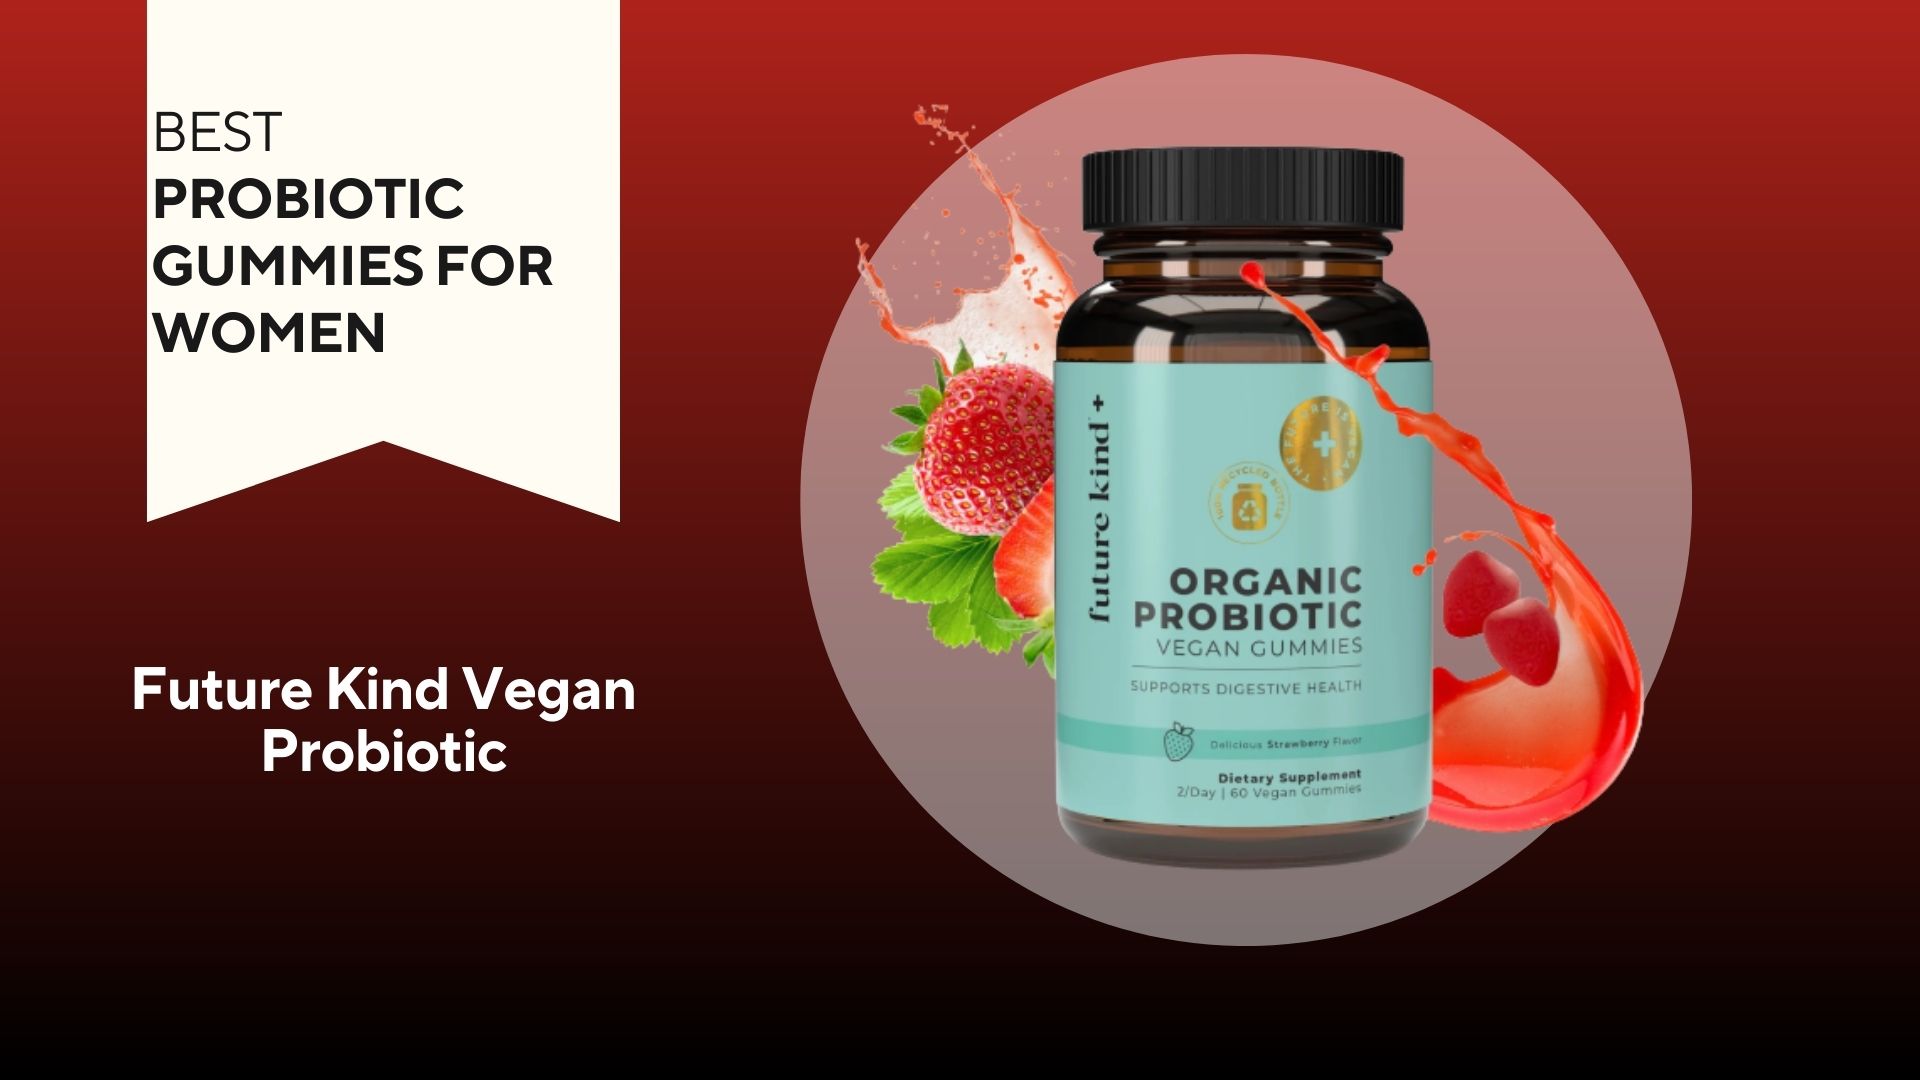 A red background with a white banner that says, "Best Probiotic Gummies for Women" next to an amber and teal bottle of Organic Probiotic Vegan Gummies in Strawberry flavor